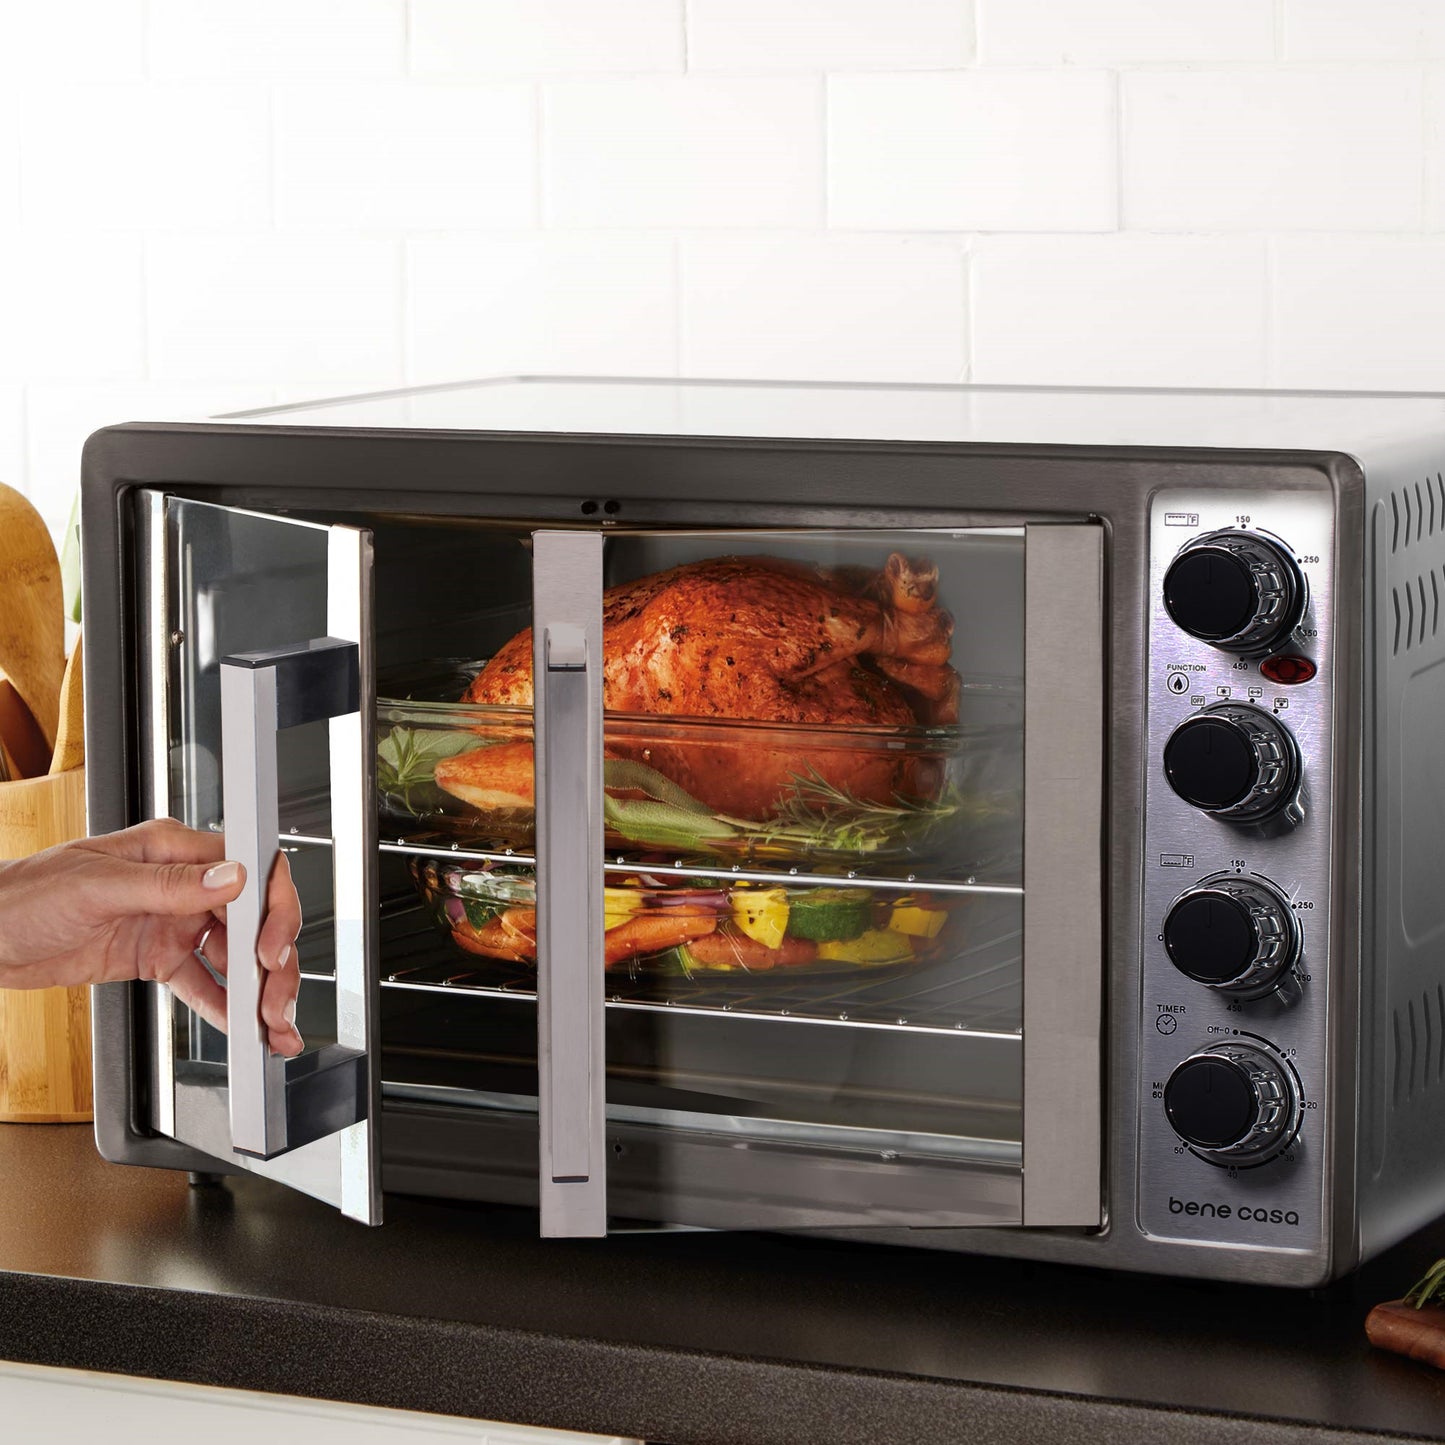 
                  
                    Bene Casa French Door Convection Oven with rotisserie, Stainless Steel, Extra Large 45L
                  
                